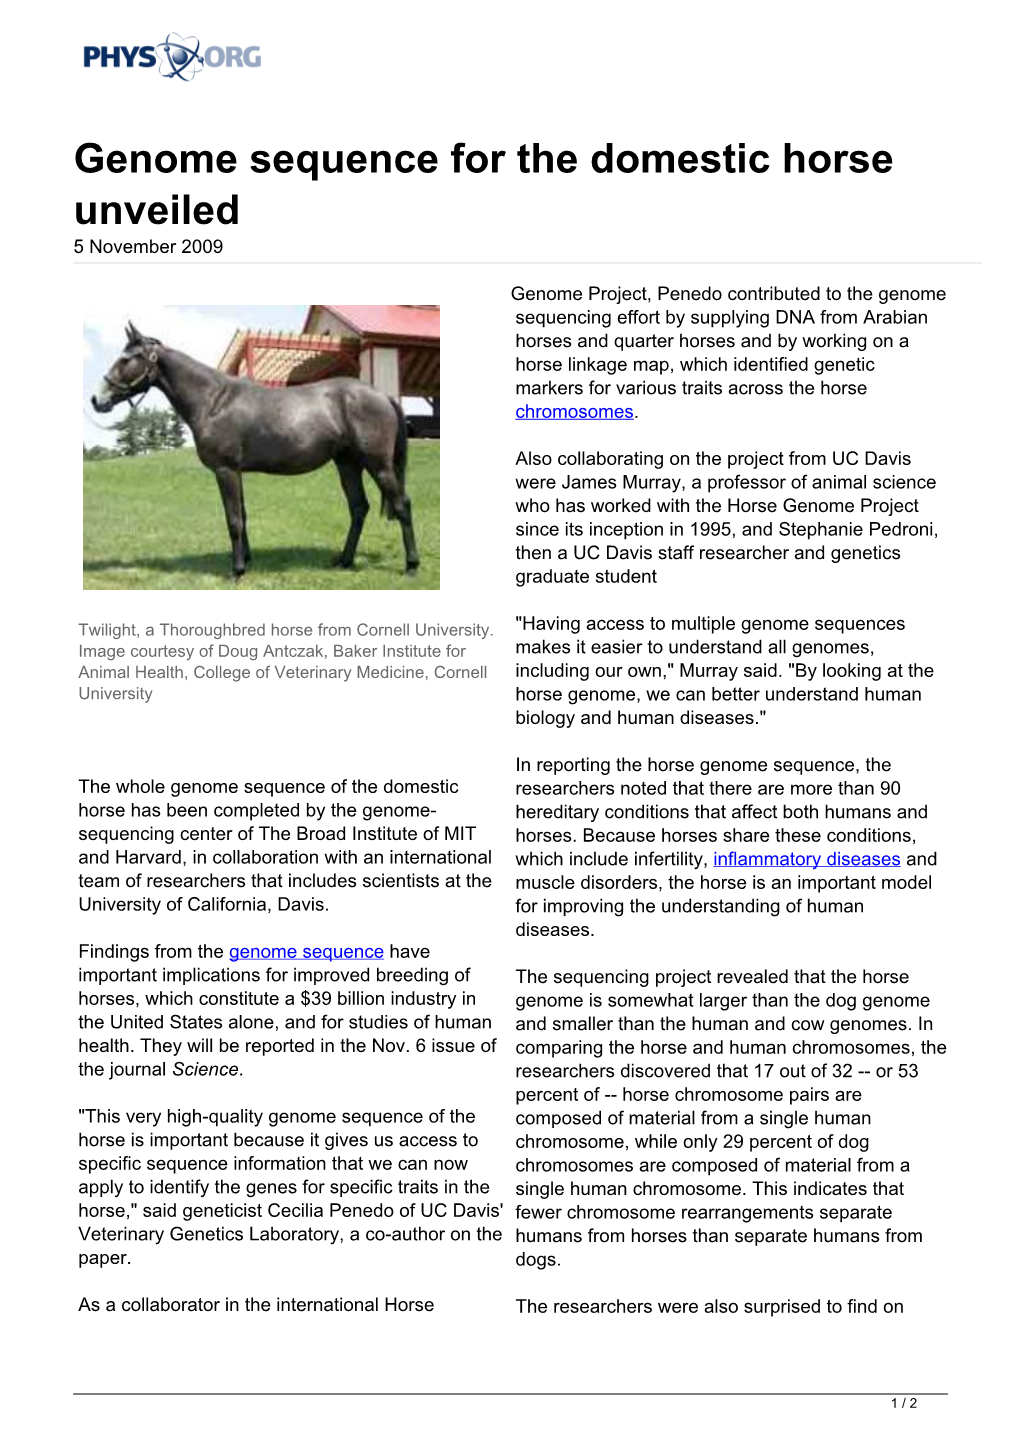 Genome Sequence for the Domestic Horse Unveiled 5 November 2009